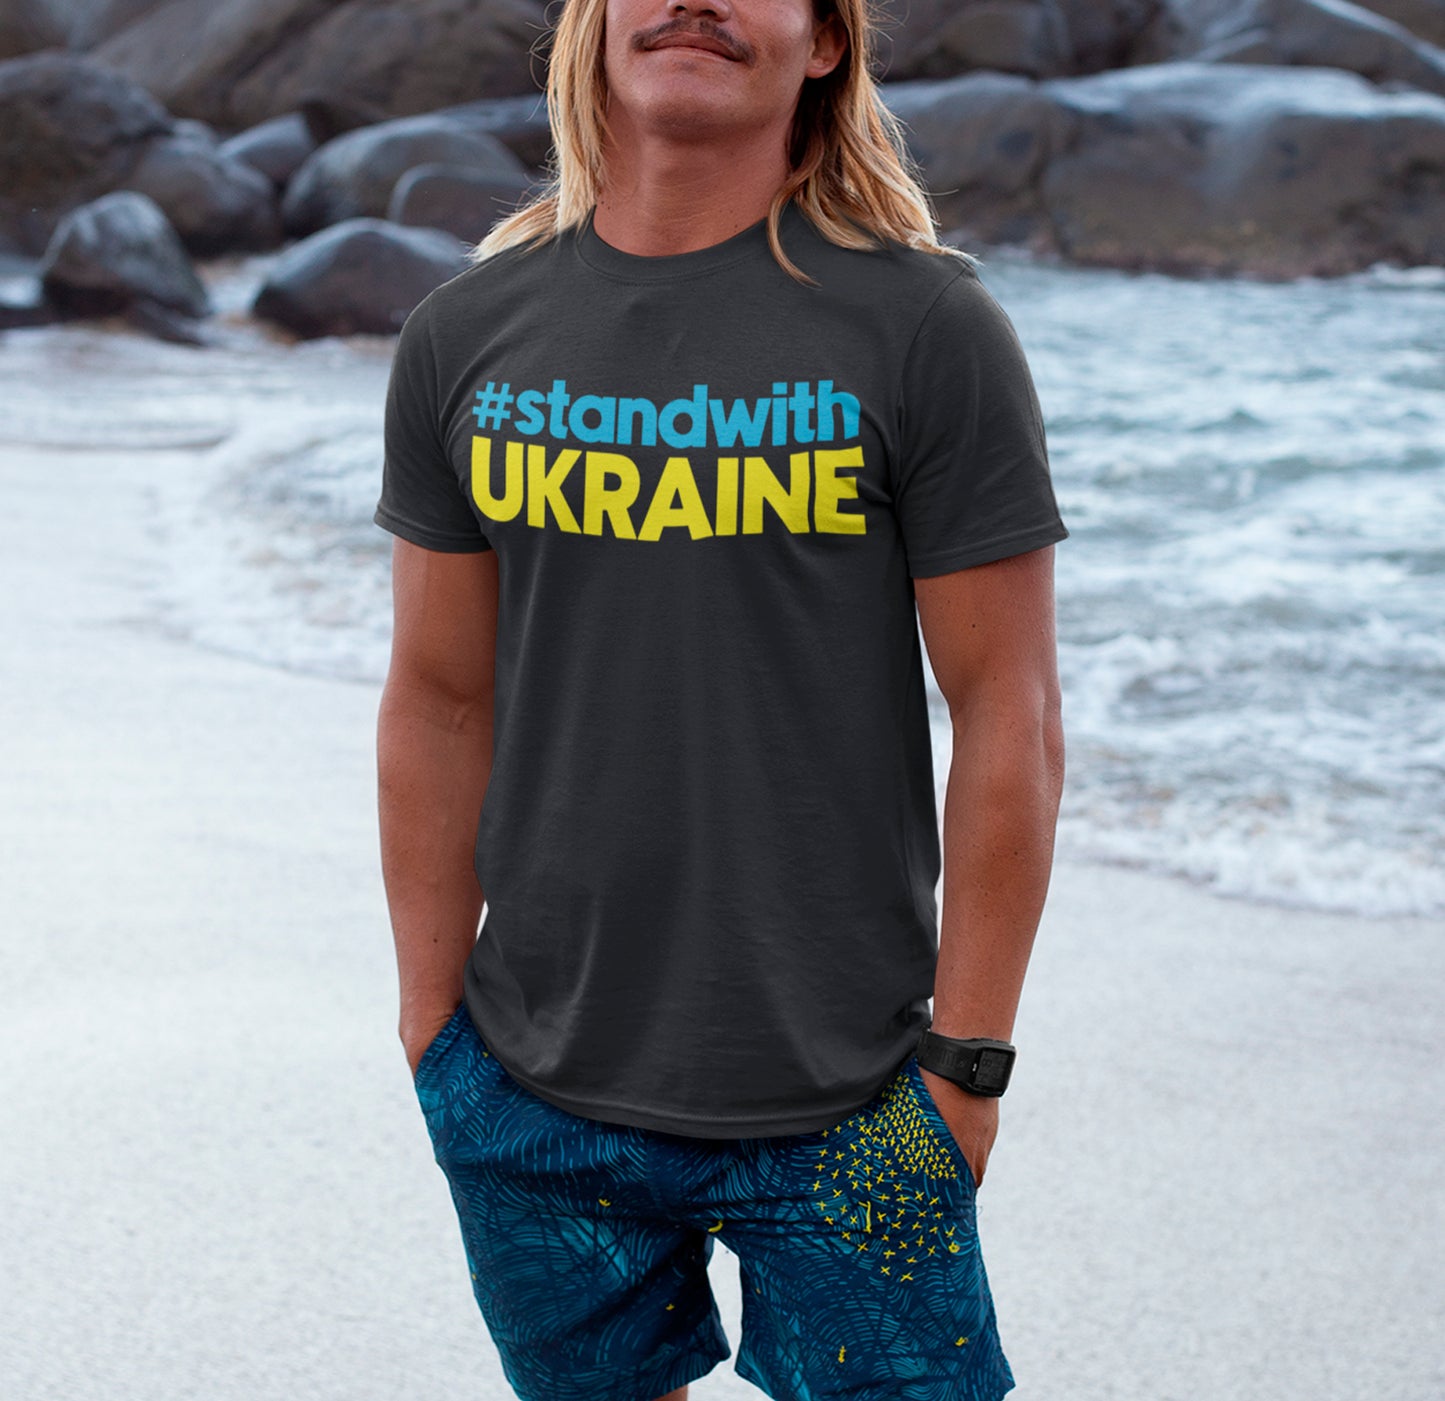 Stand with Ukraine Support Shirt